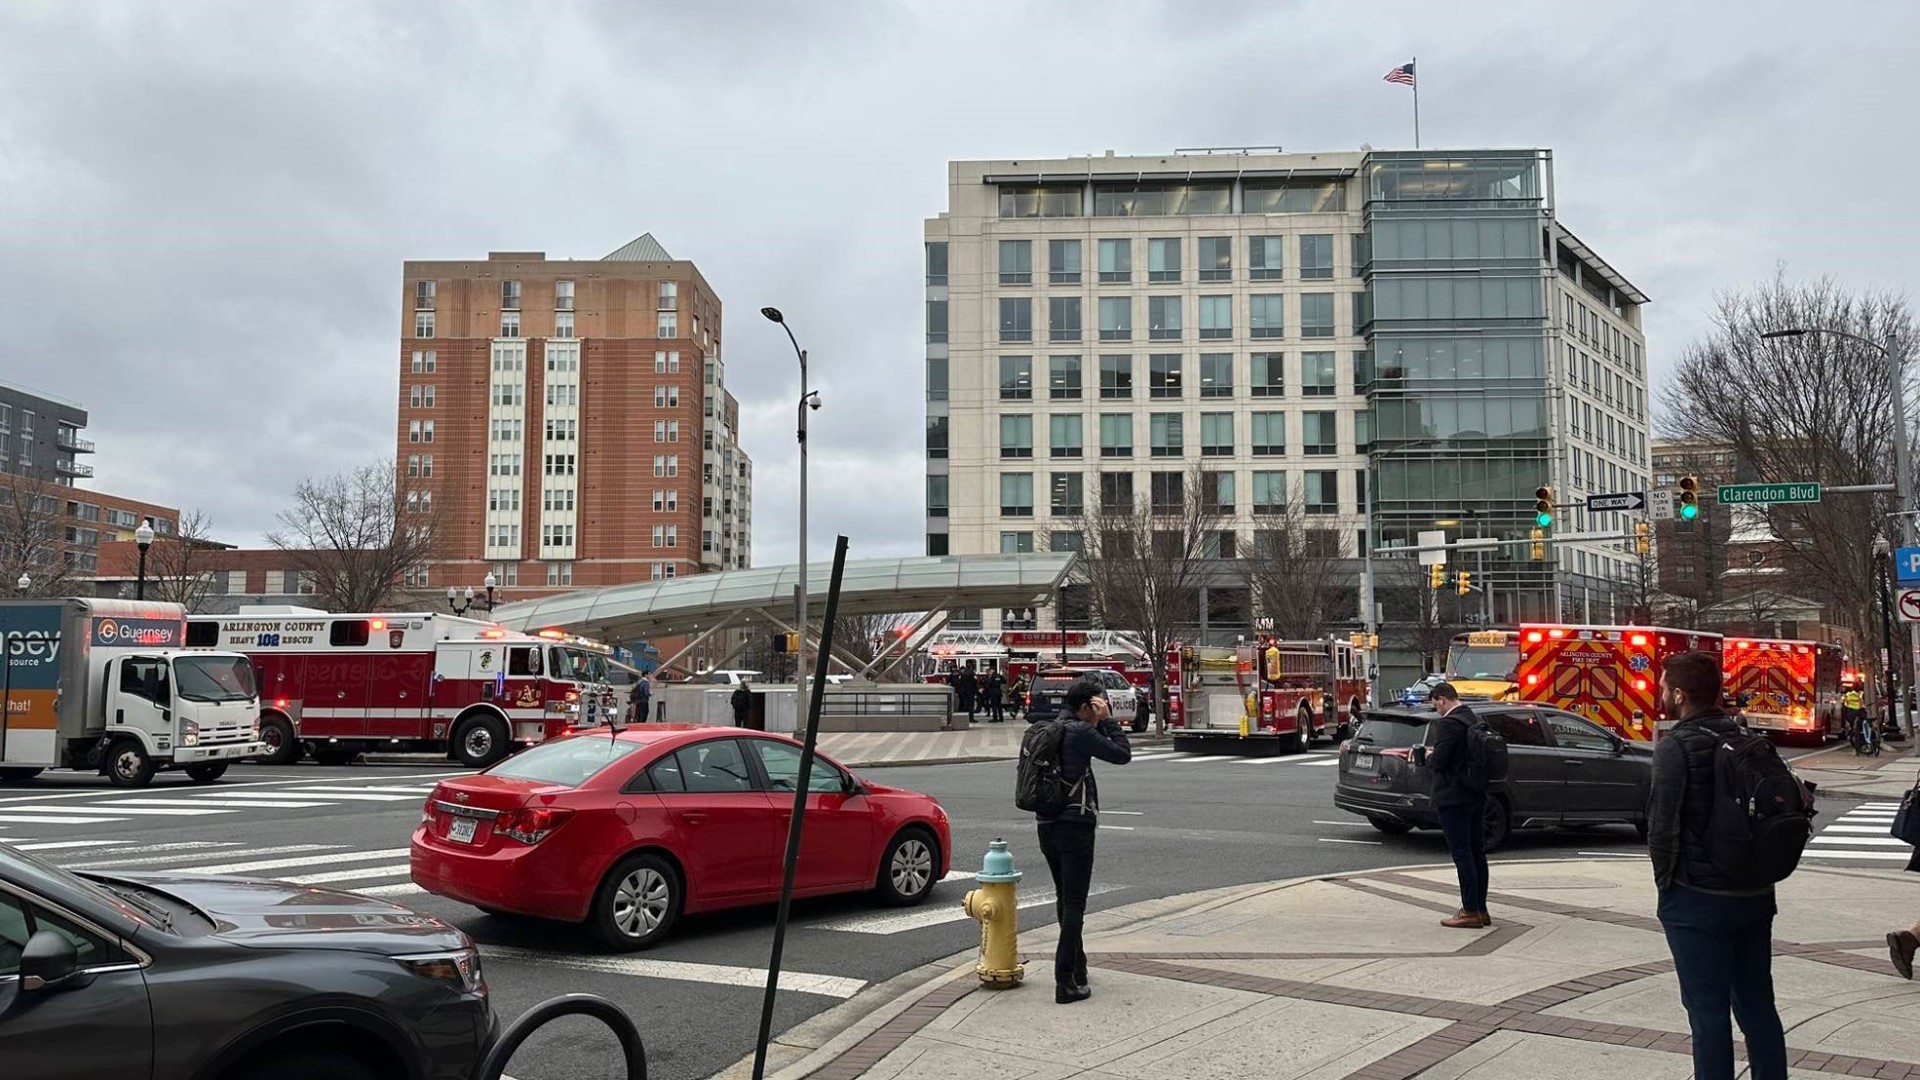 The Clarendon Metro station was briefly evacuated Tuesday morning due to a report of smoke on the platform.